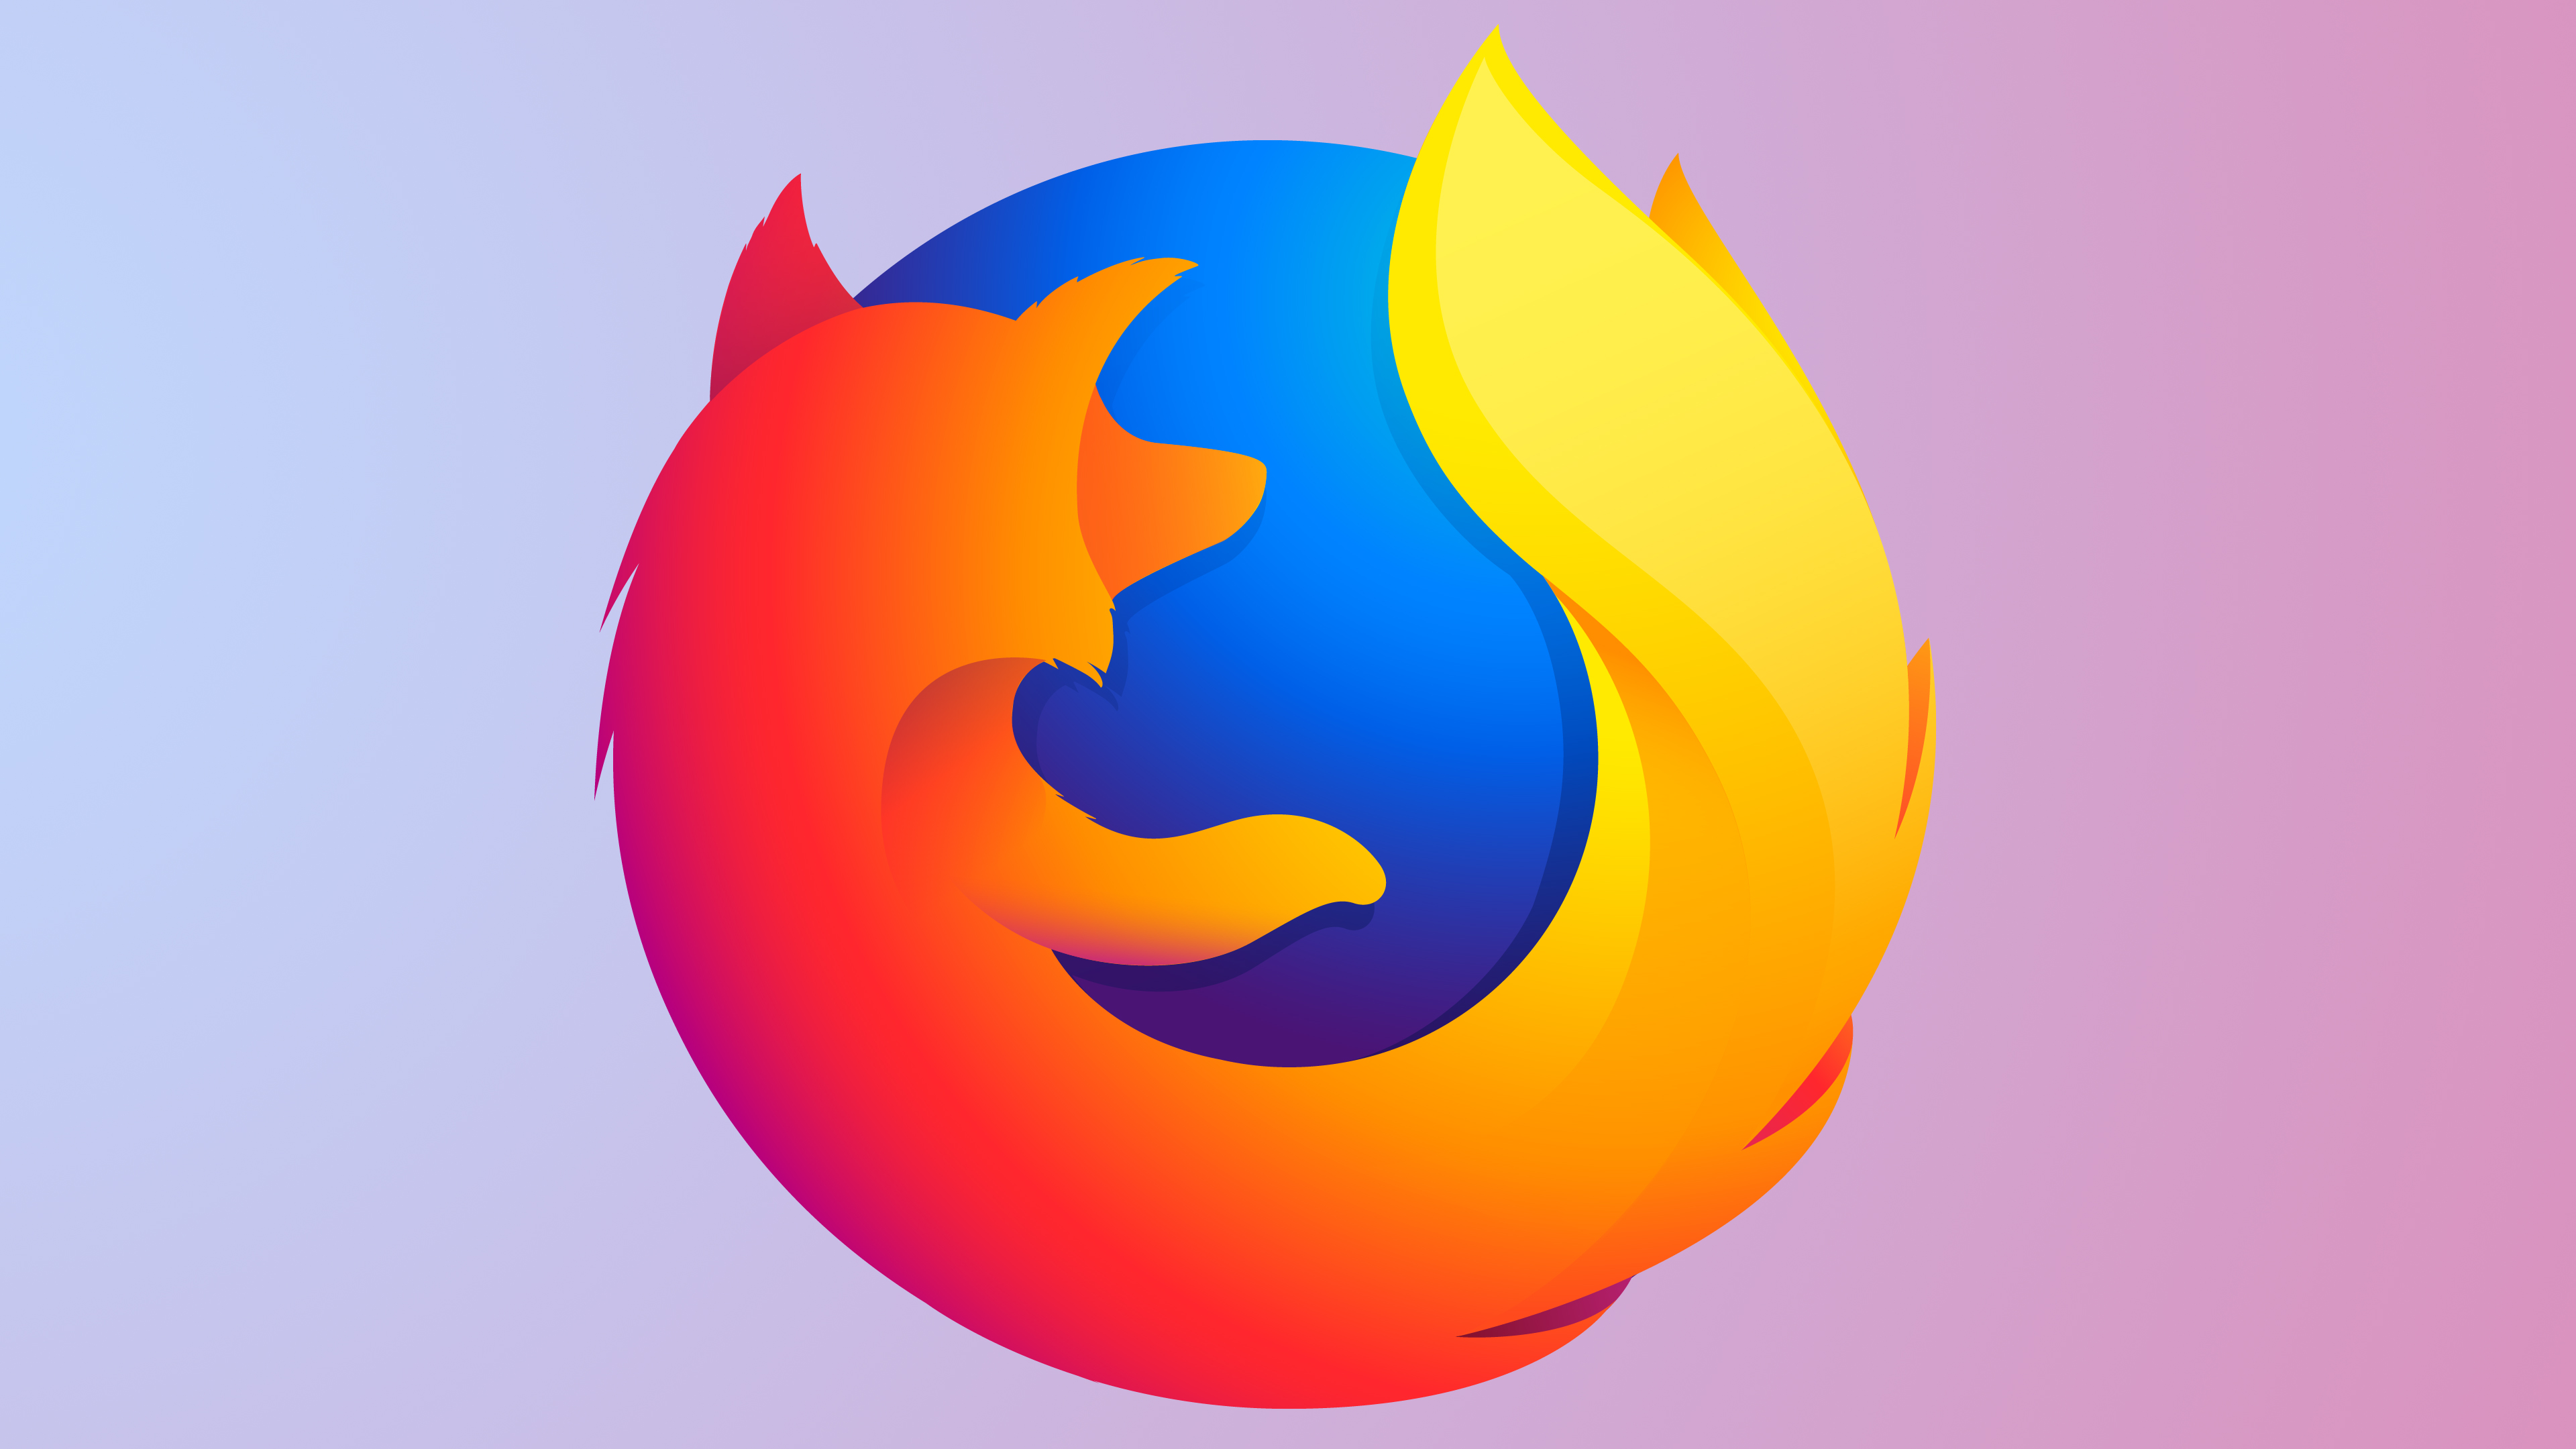  Firefox 95.0 update comes with beefed up sandbox security 